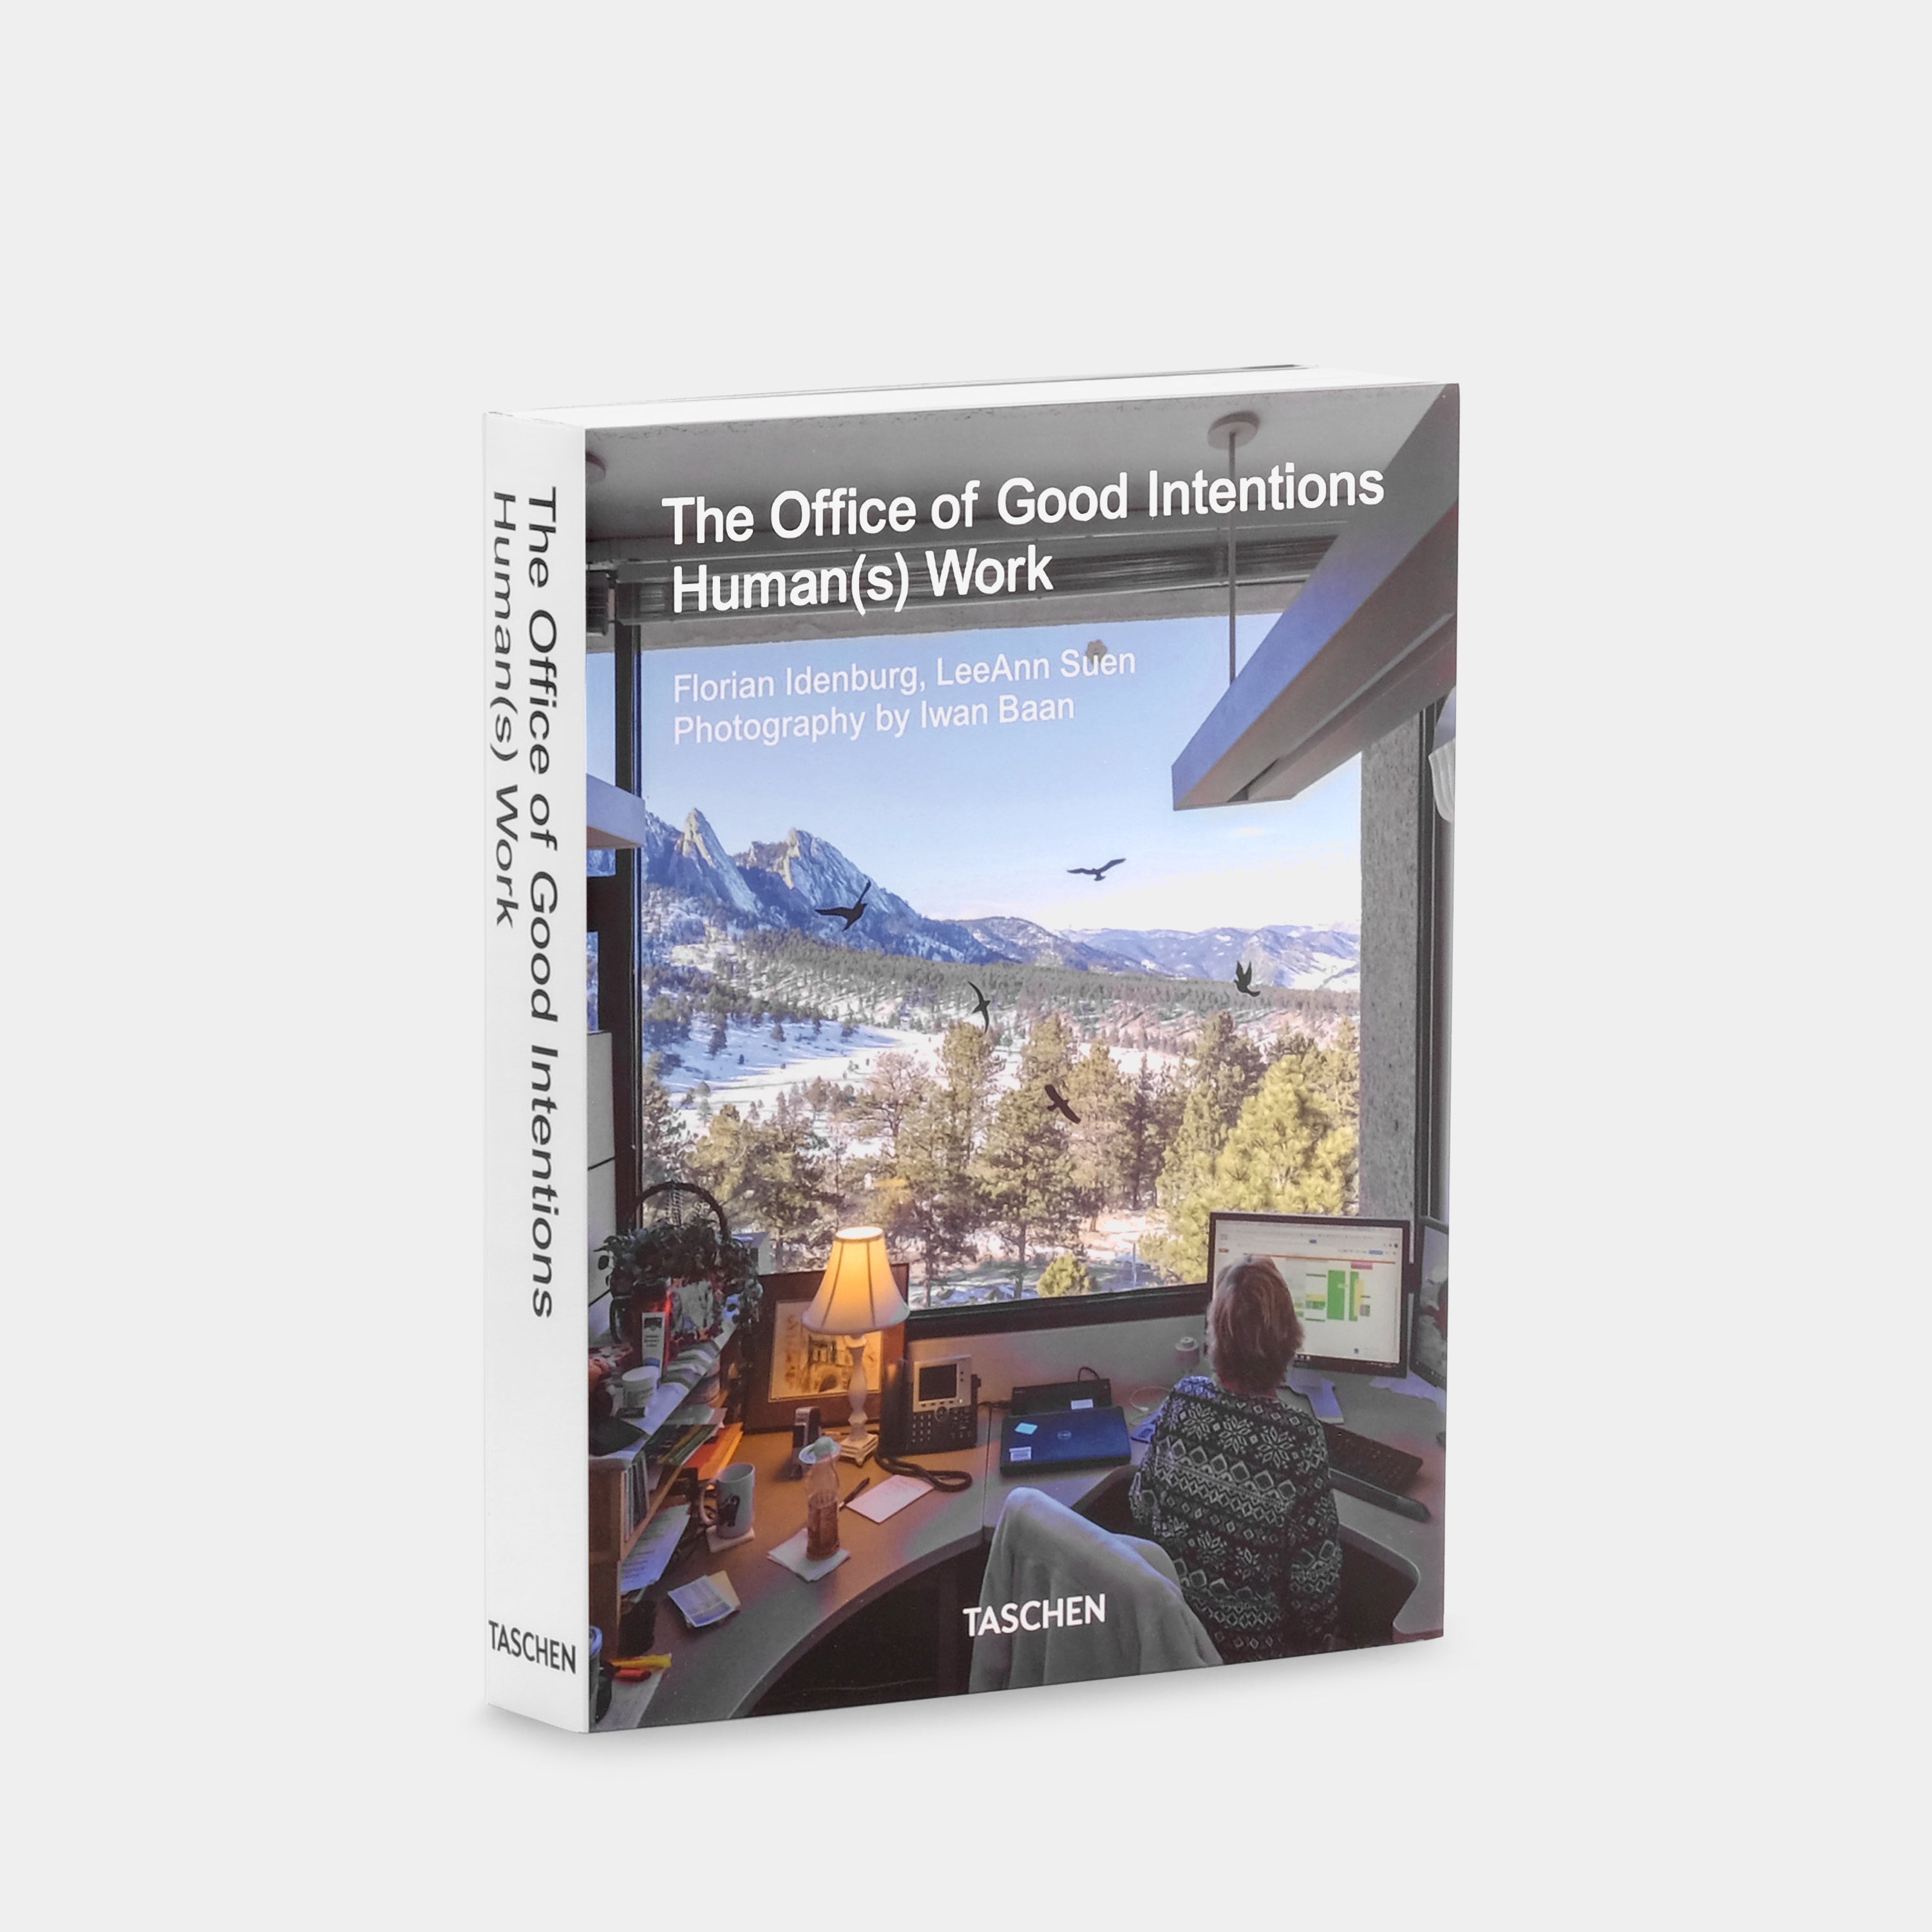 The Office of Good Intentions. Human(s) Work Taschen Book